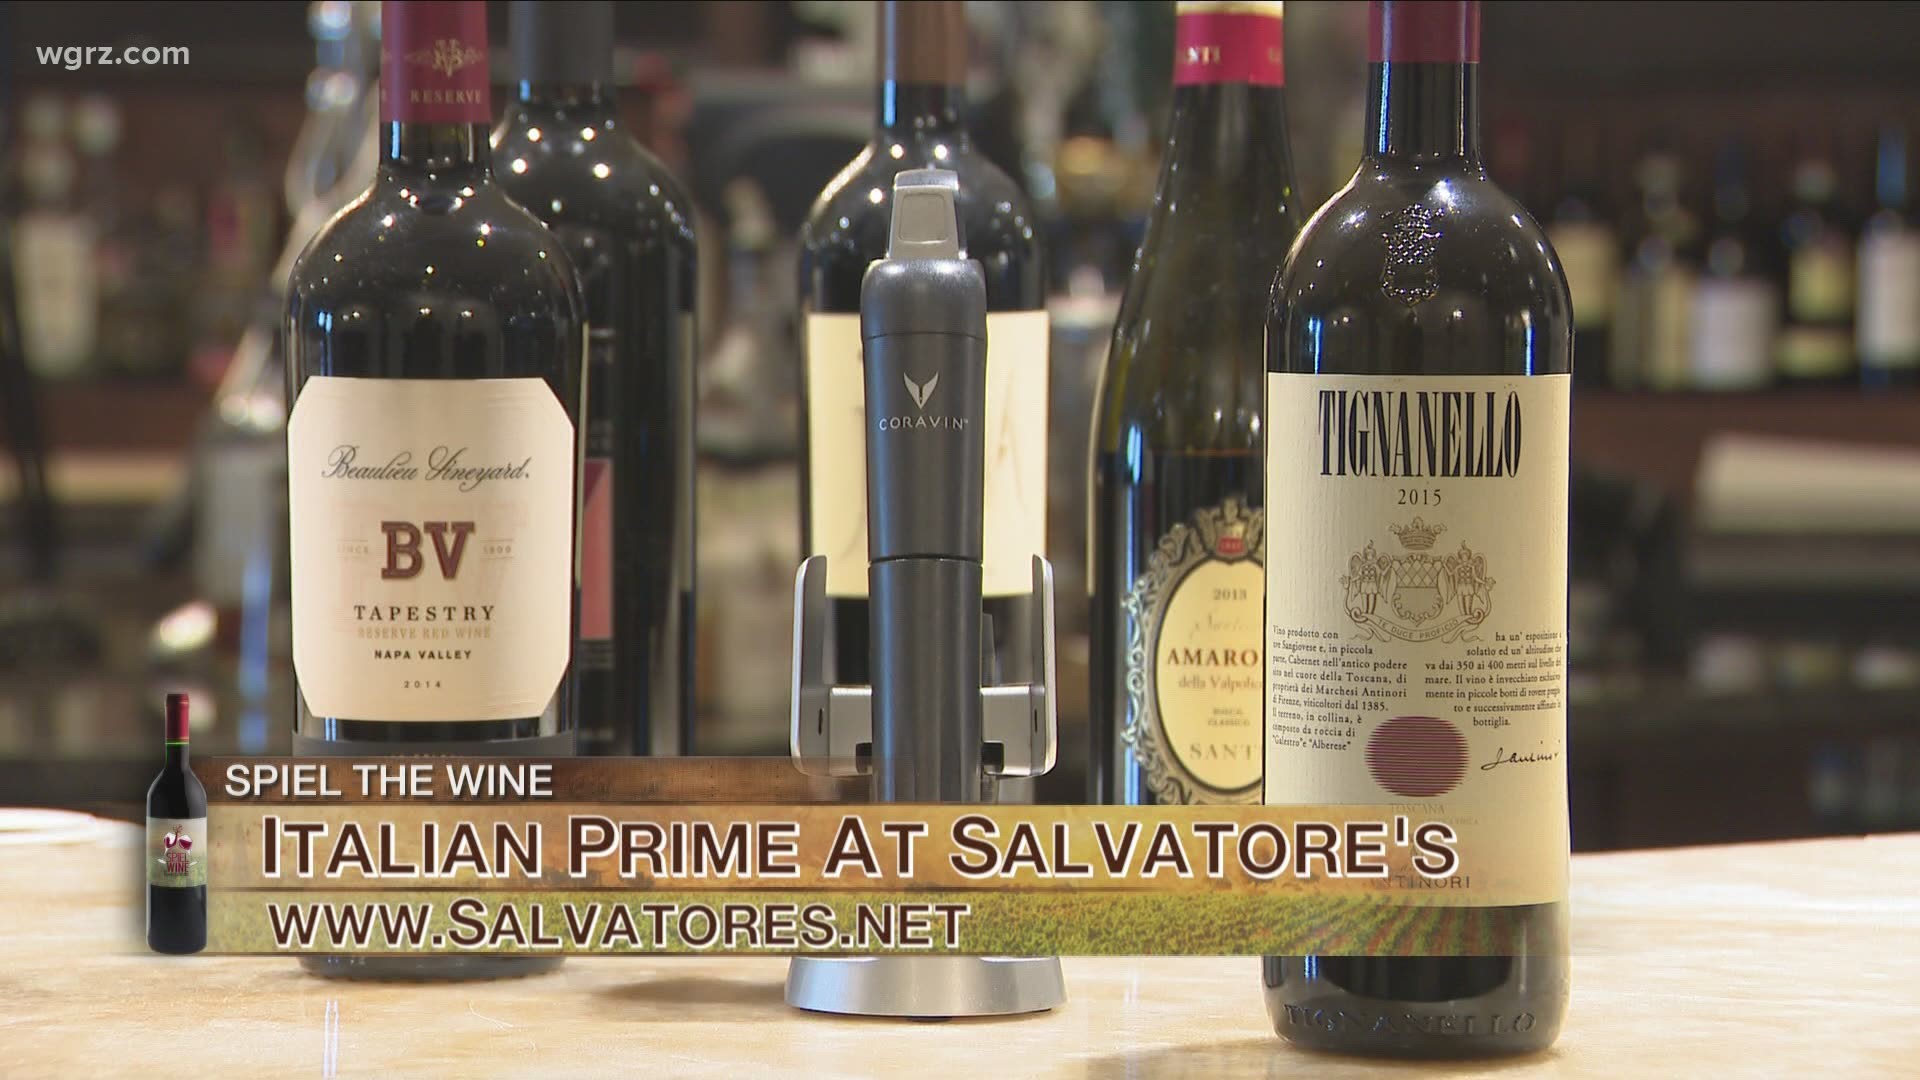 Spiel The Wine - September 26 - Segment 1 (THIS VIDEO IS SPONSORED BY ITALIAN PRIME AT SALVATORE'S)